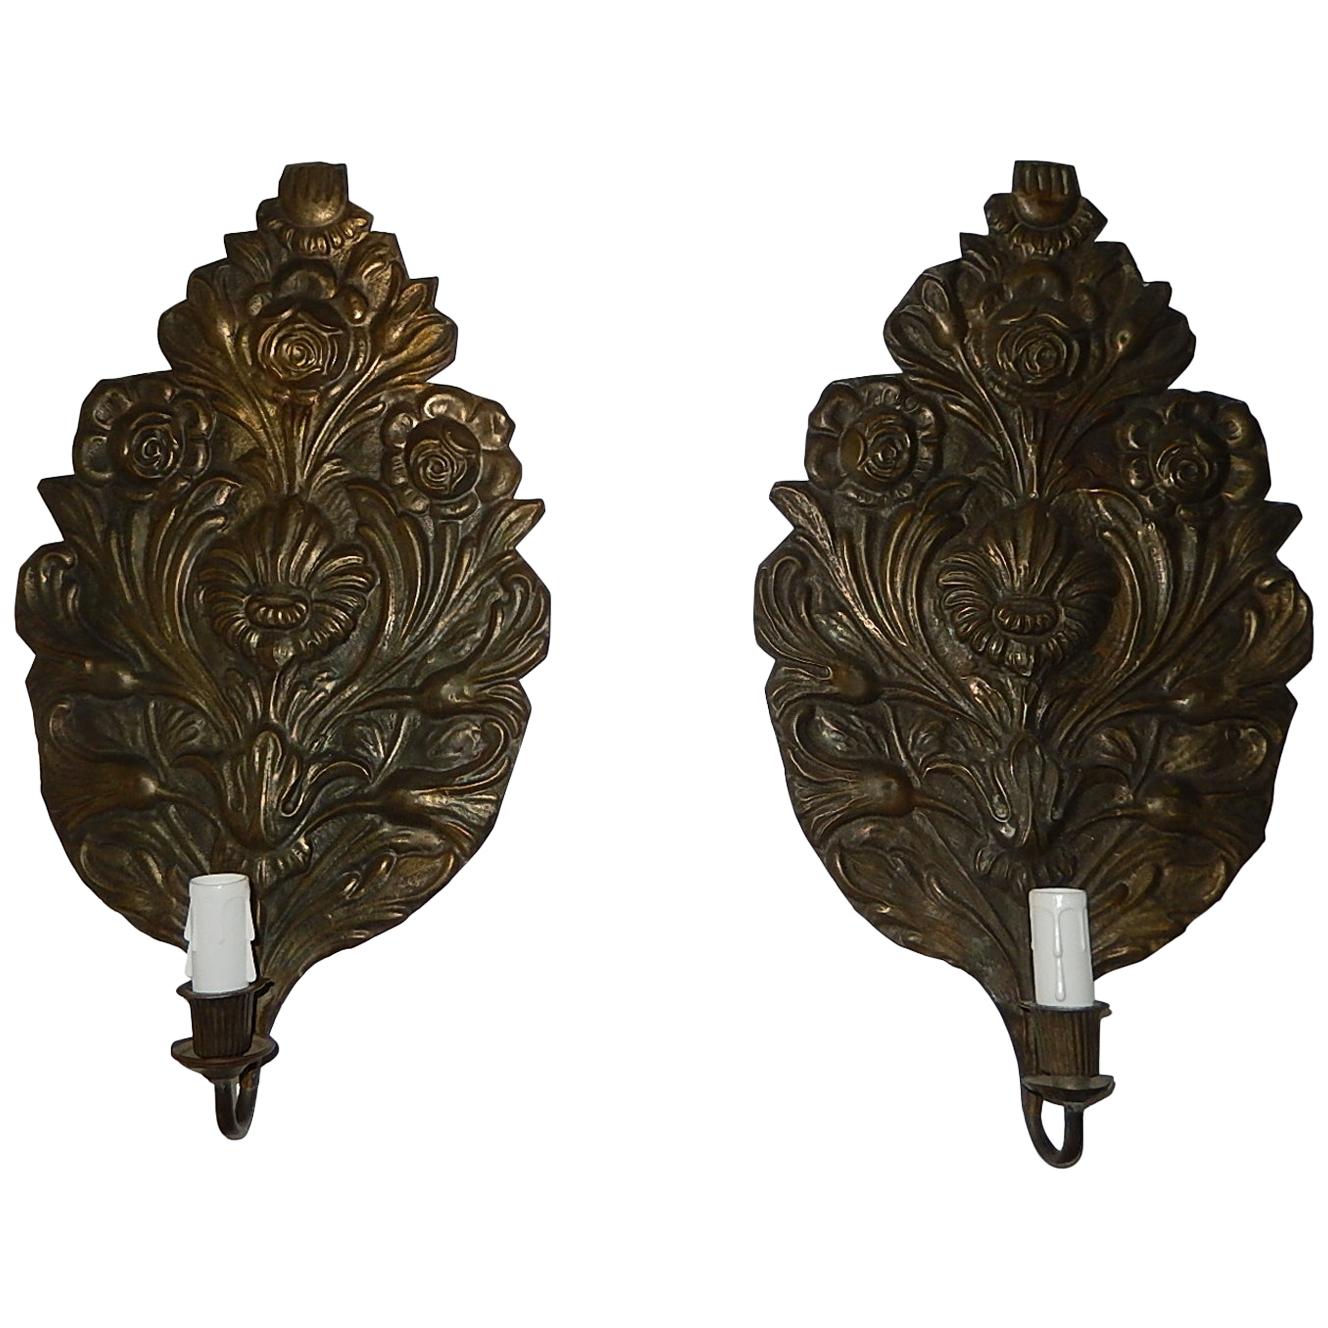 French Dark Tinned Copper "Palm" Floral Embossed Sconces, circa 1900